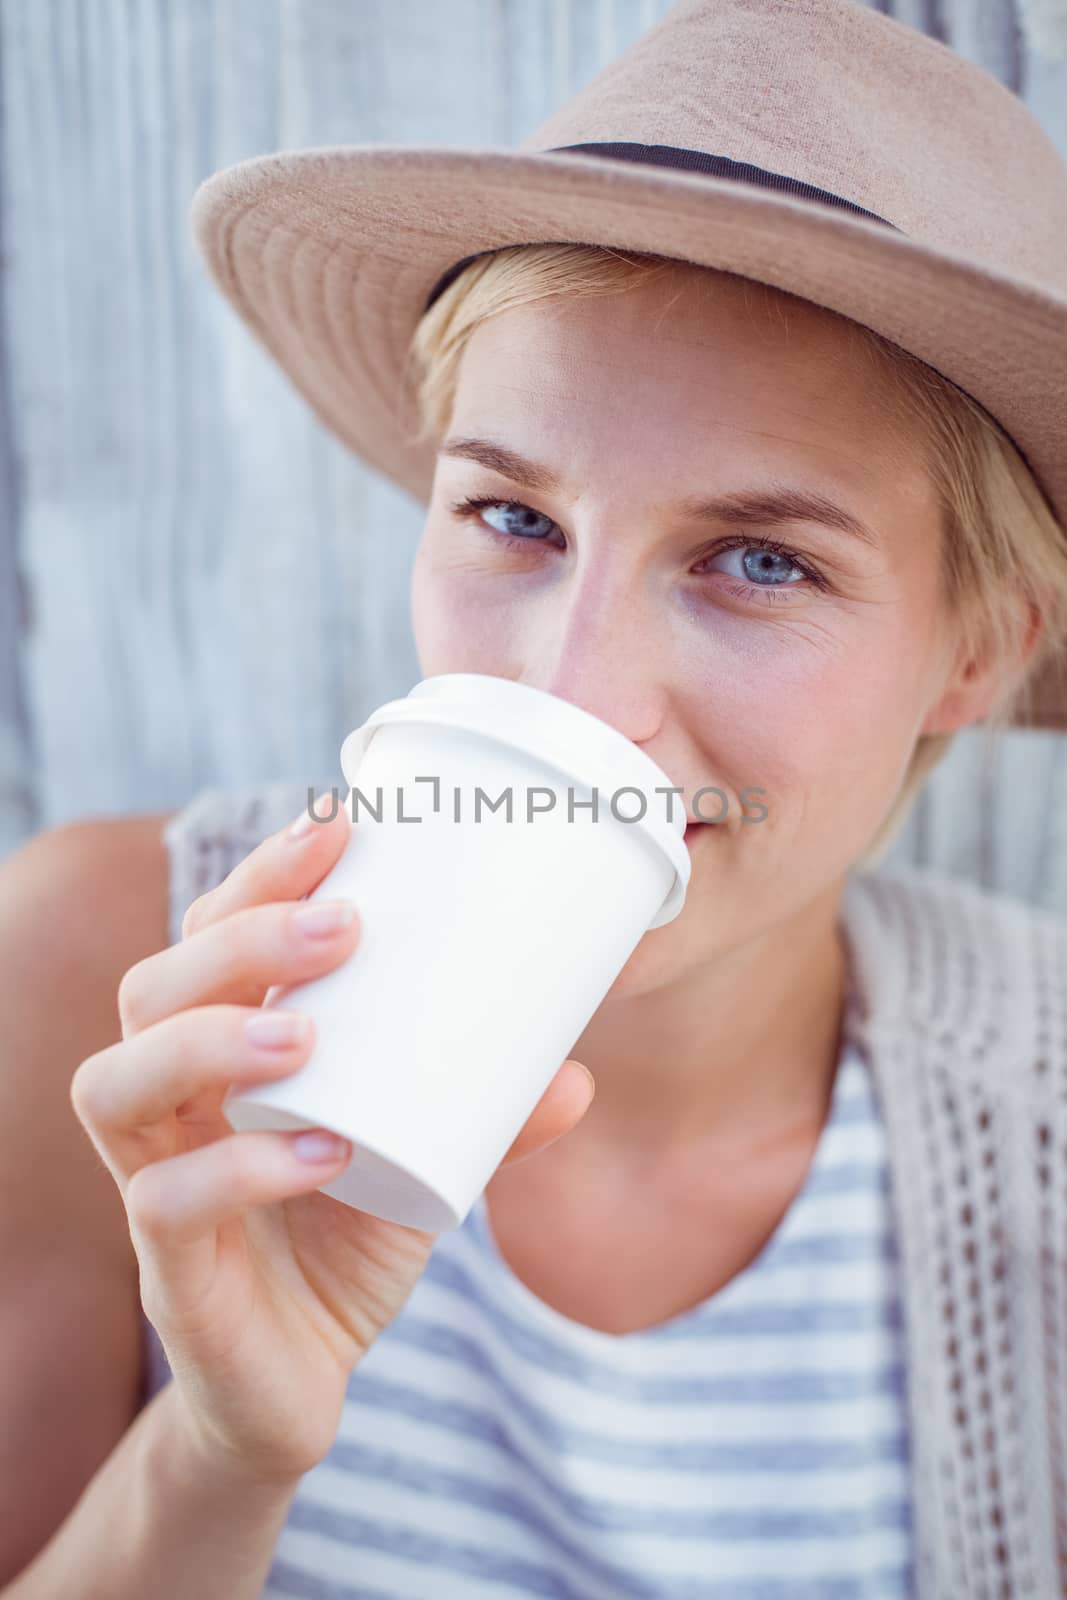 Pretty blonde woman drinking coffee on wooden background